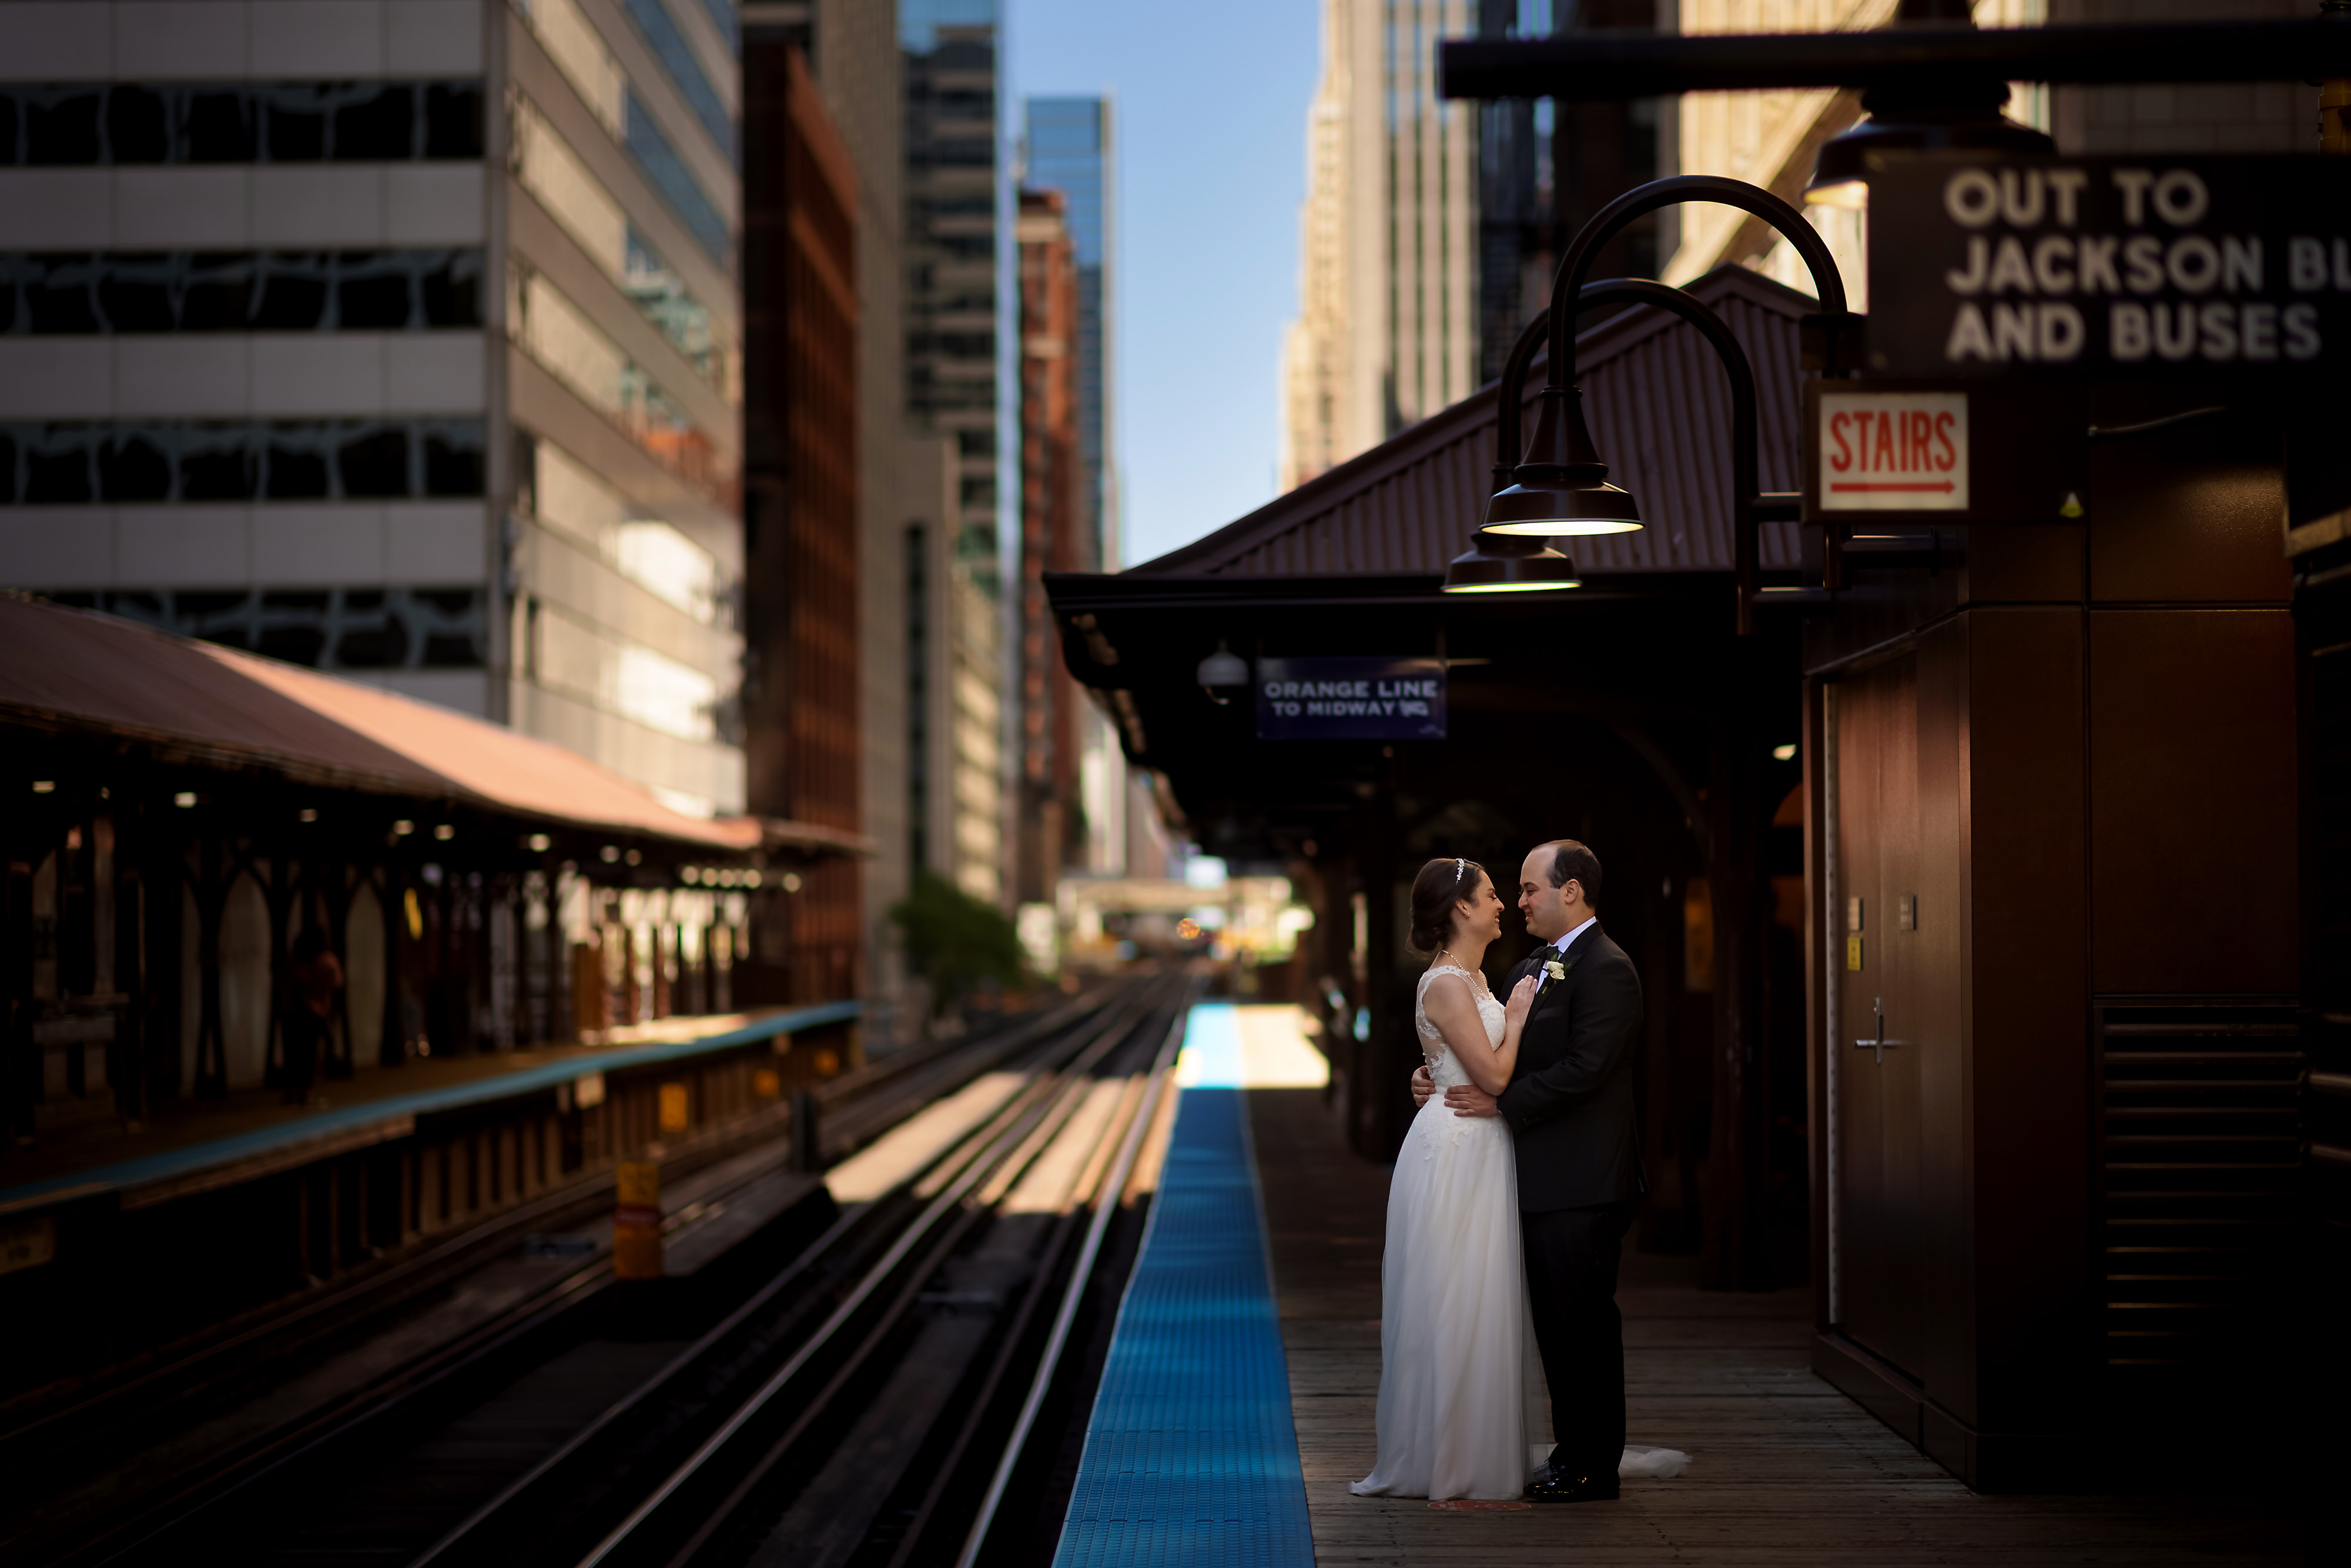 Bride and groom pose for wedding portraits at the Quincy Station El stop in Chicago